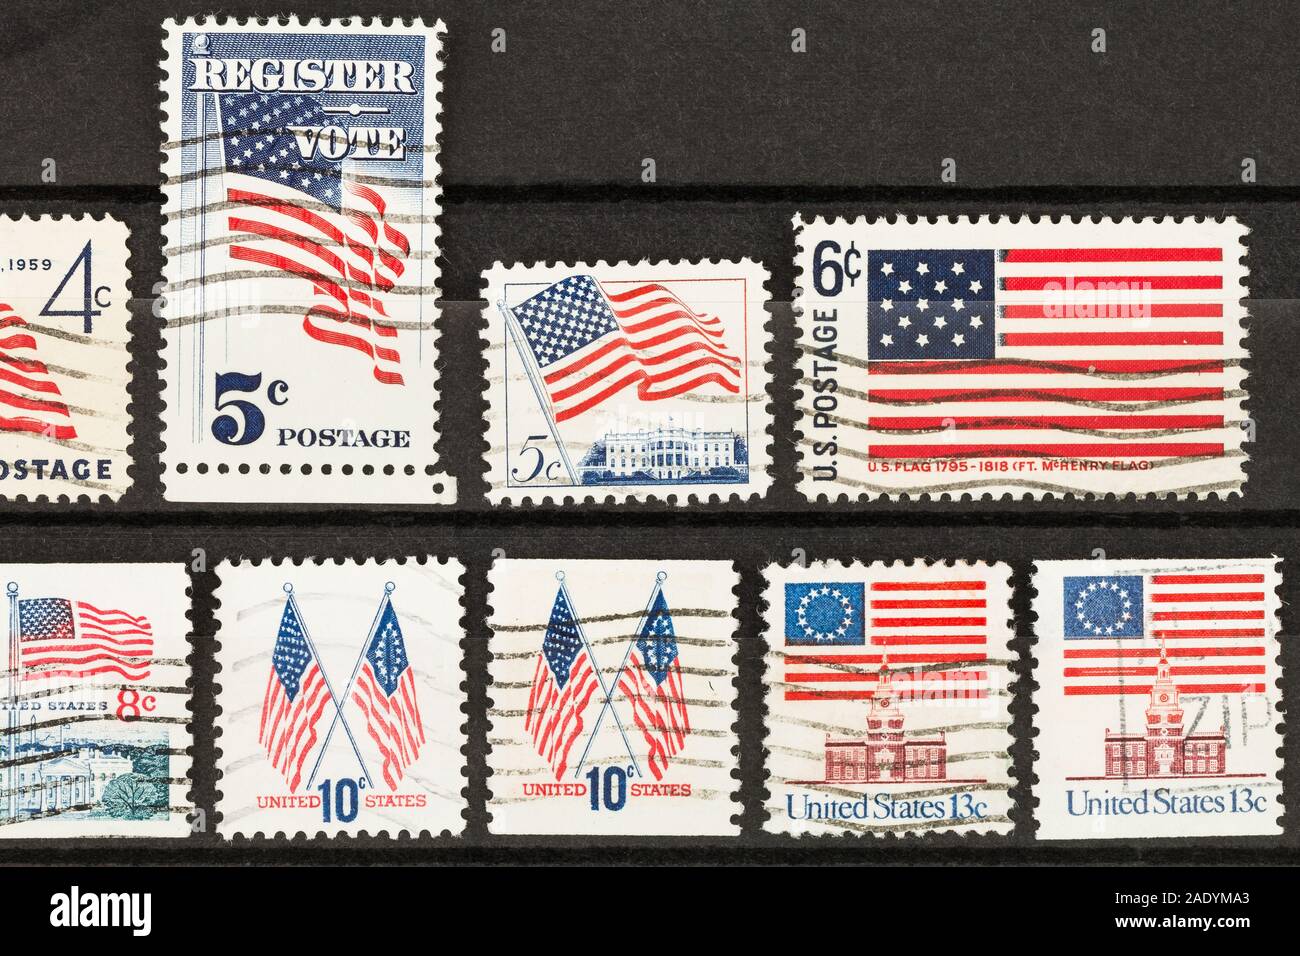 SEATTLE WASHINGTON - November 28, 2019:  Rows of old used United States postage stamps in stock album. Stock Photo